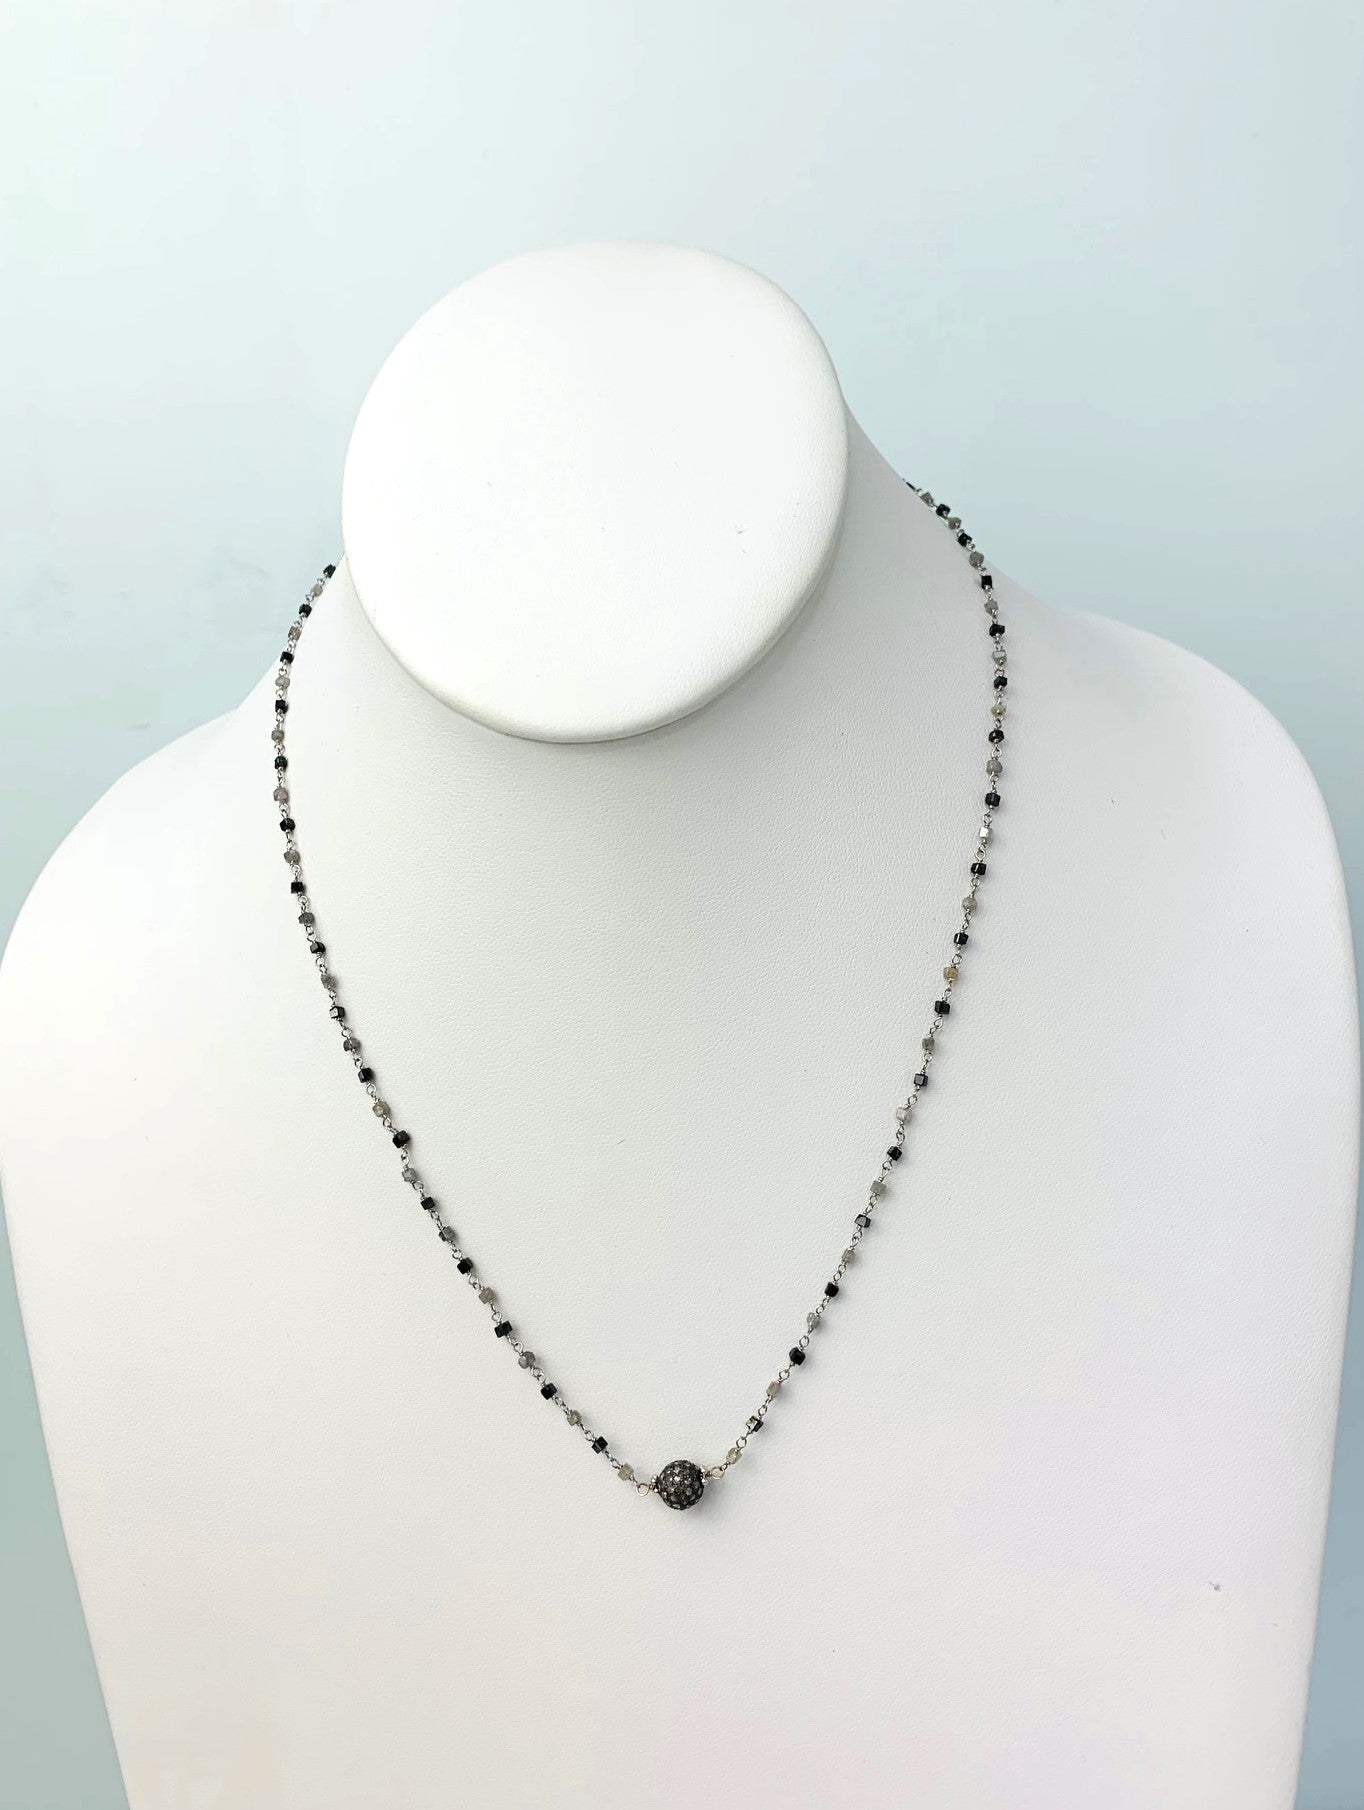 18" Pave Ball Center Black And Grey Cube Diamond Rosary Necklace in 14KW, SS - NCK-384-DCOROSDIA14WSS-BLKGRY-18 9.5ctw